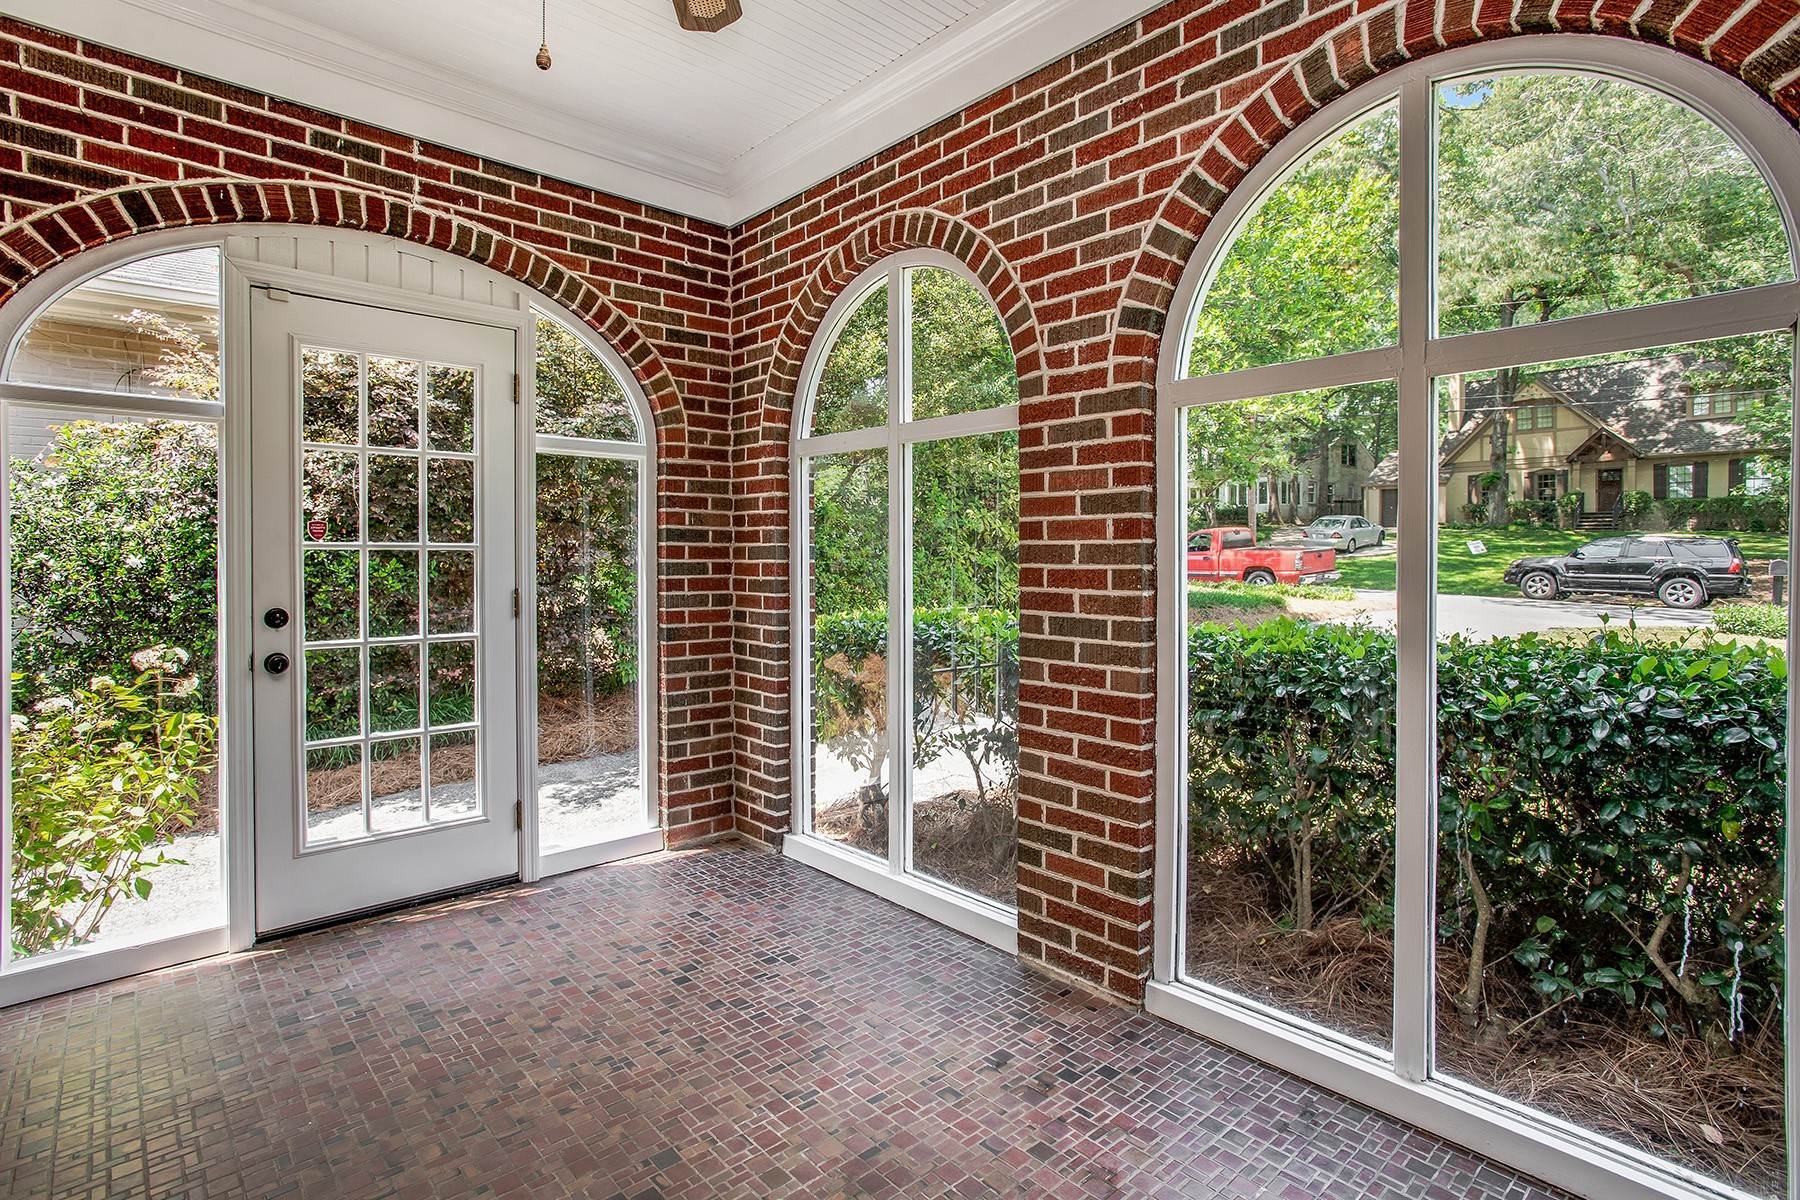 6. Single Family Homes for Sale at The Possibilities Are Endless In This Charming Four-Sided Brick Home 3551 Kingsboro Road Atlanta, Georgia 30319 United States